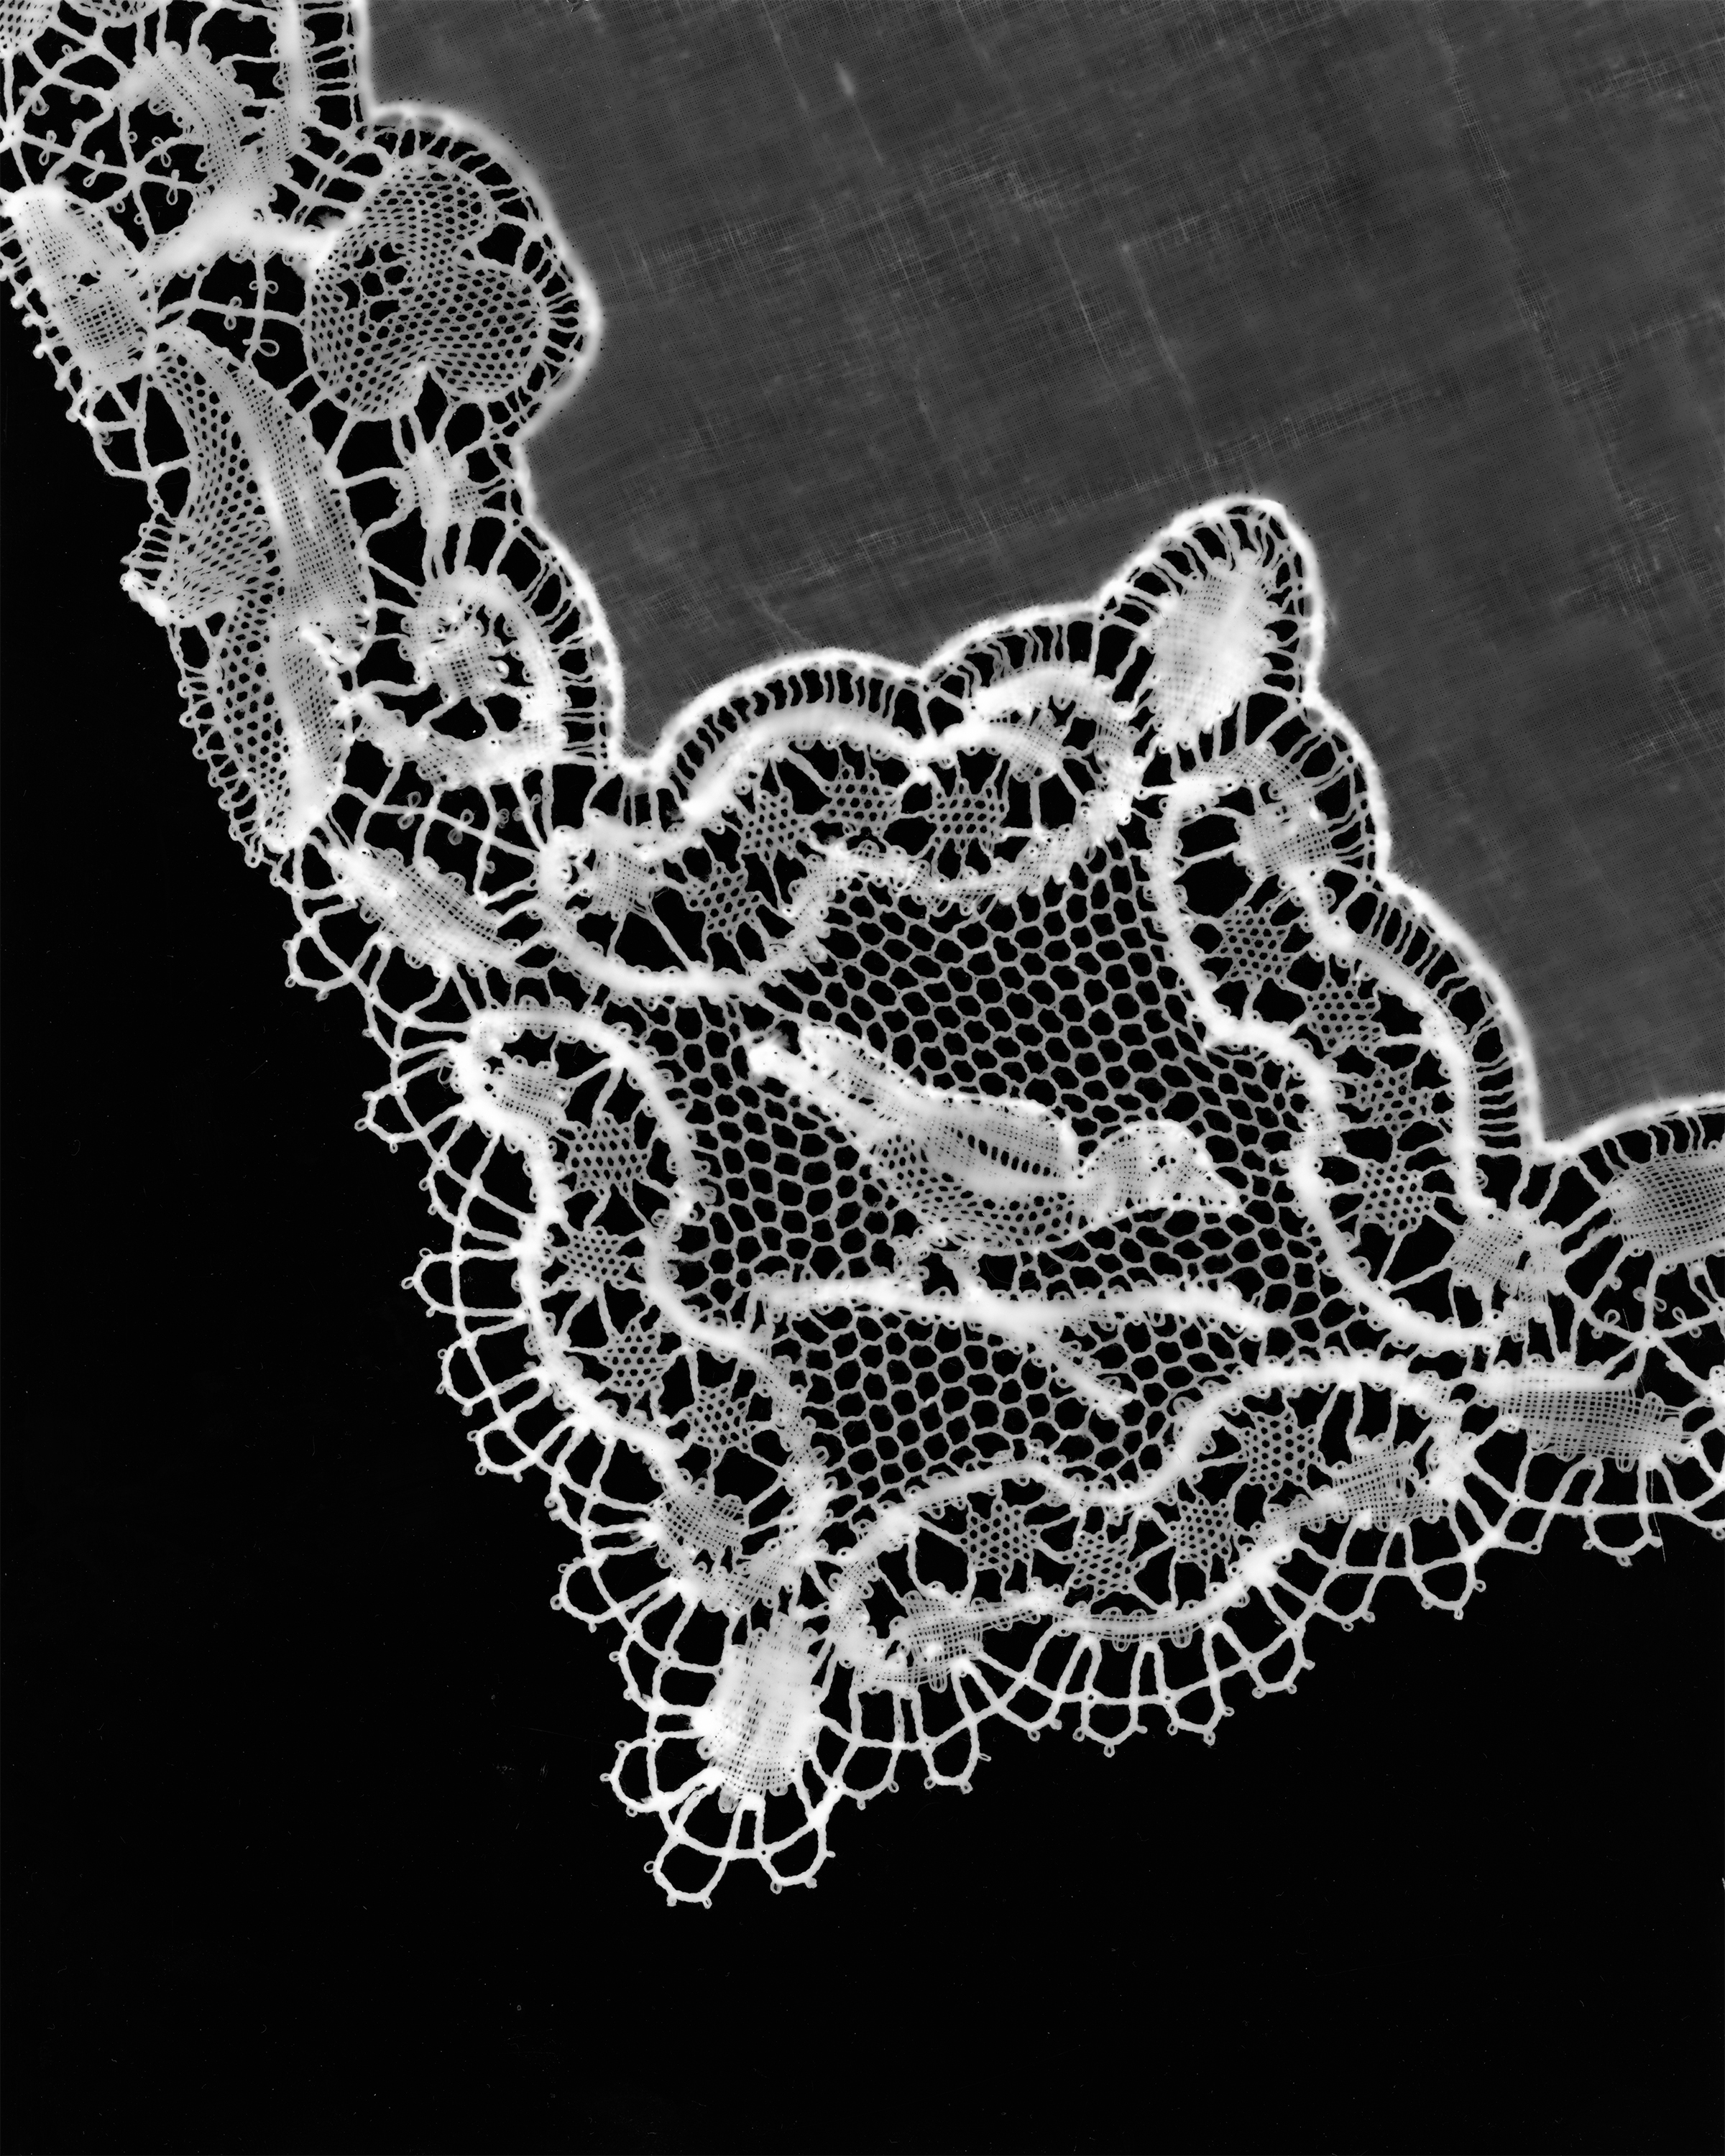 /a%20darkroom-processed%20photogram%20print.%20Antique%20lace%20with%20an%20embroidered%20bird%20sitting%20on%20a%20branch.